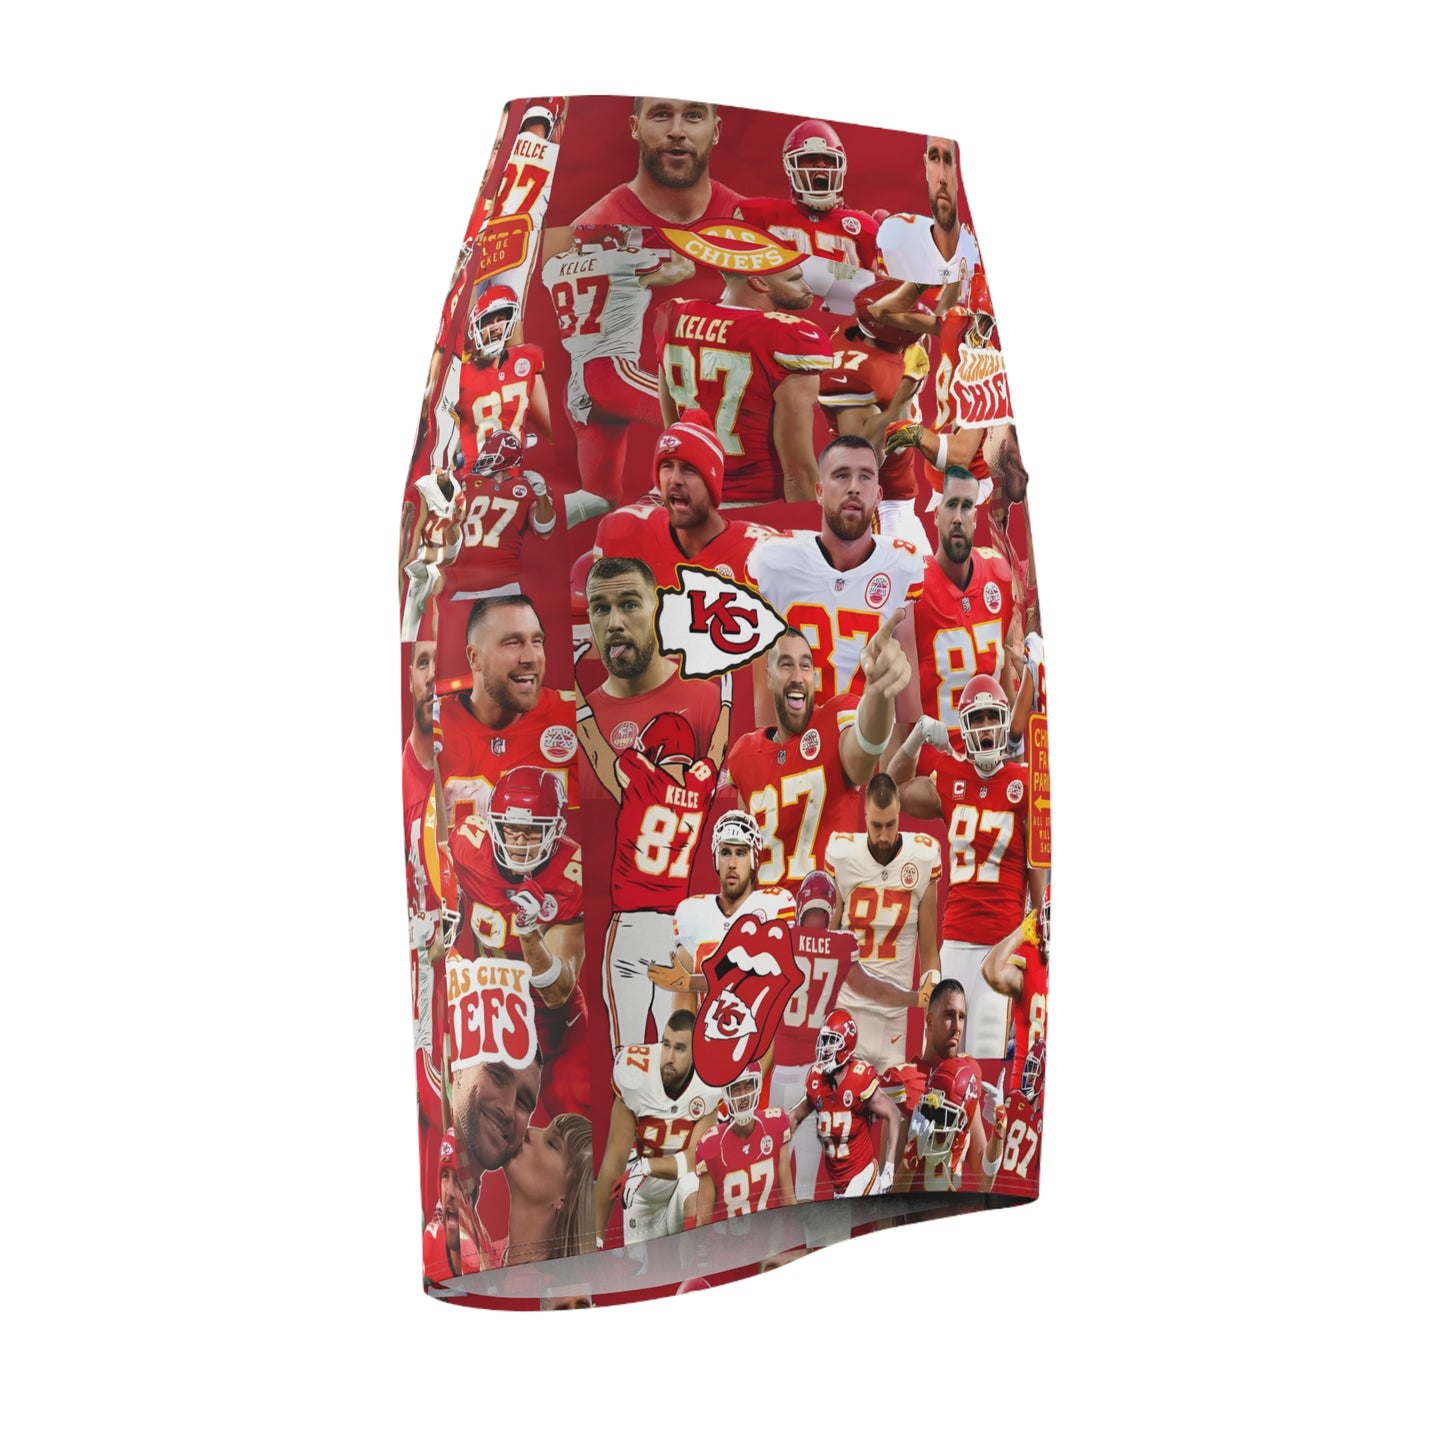 Travis Kelce Chiefs Red Collage Women's Pencil Skirt